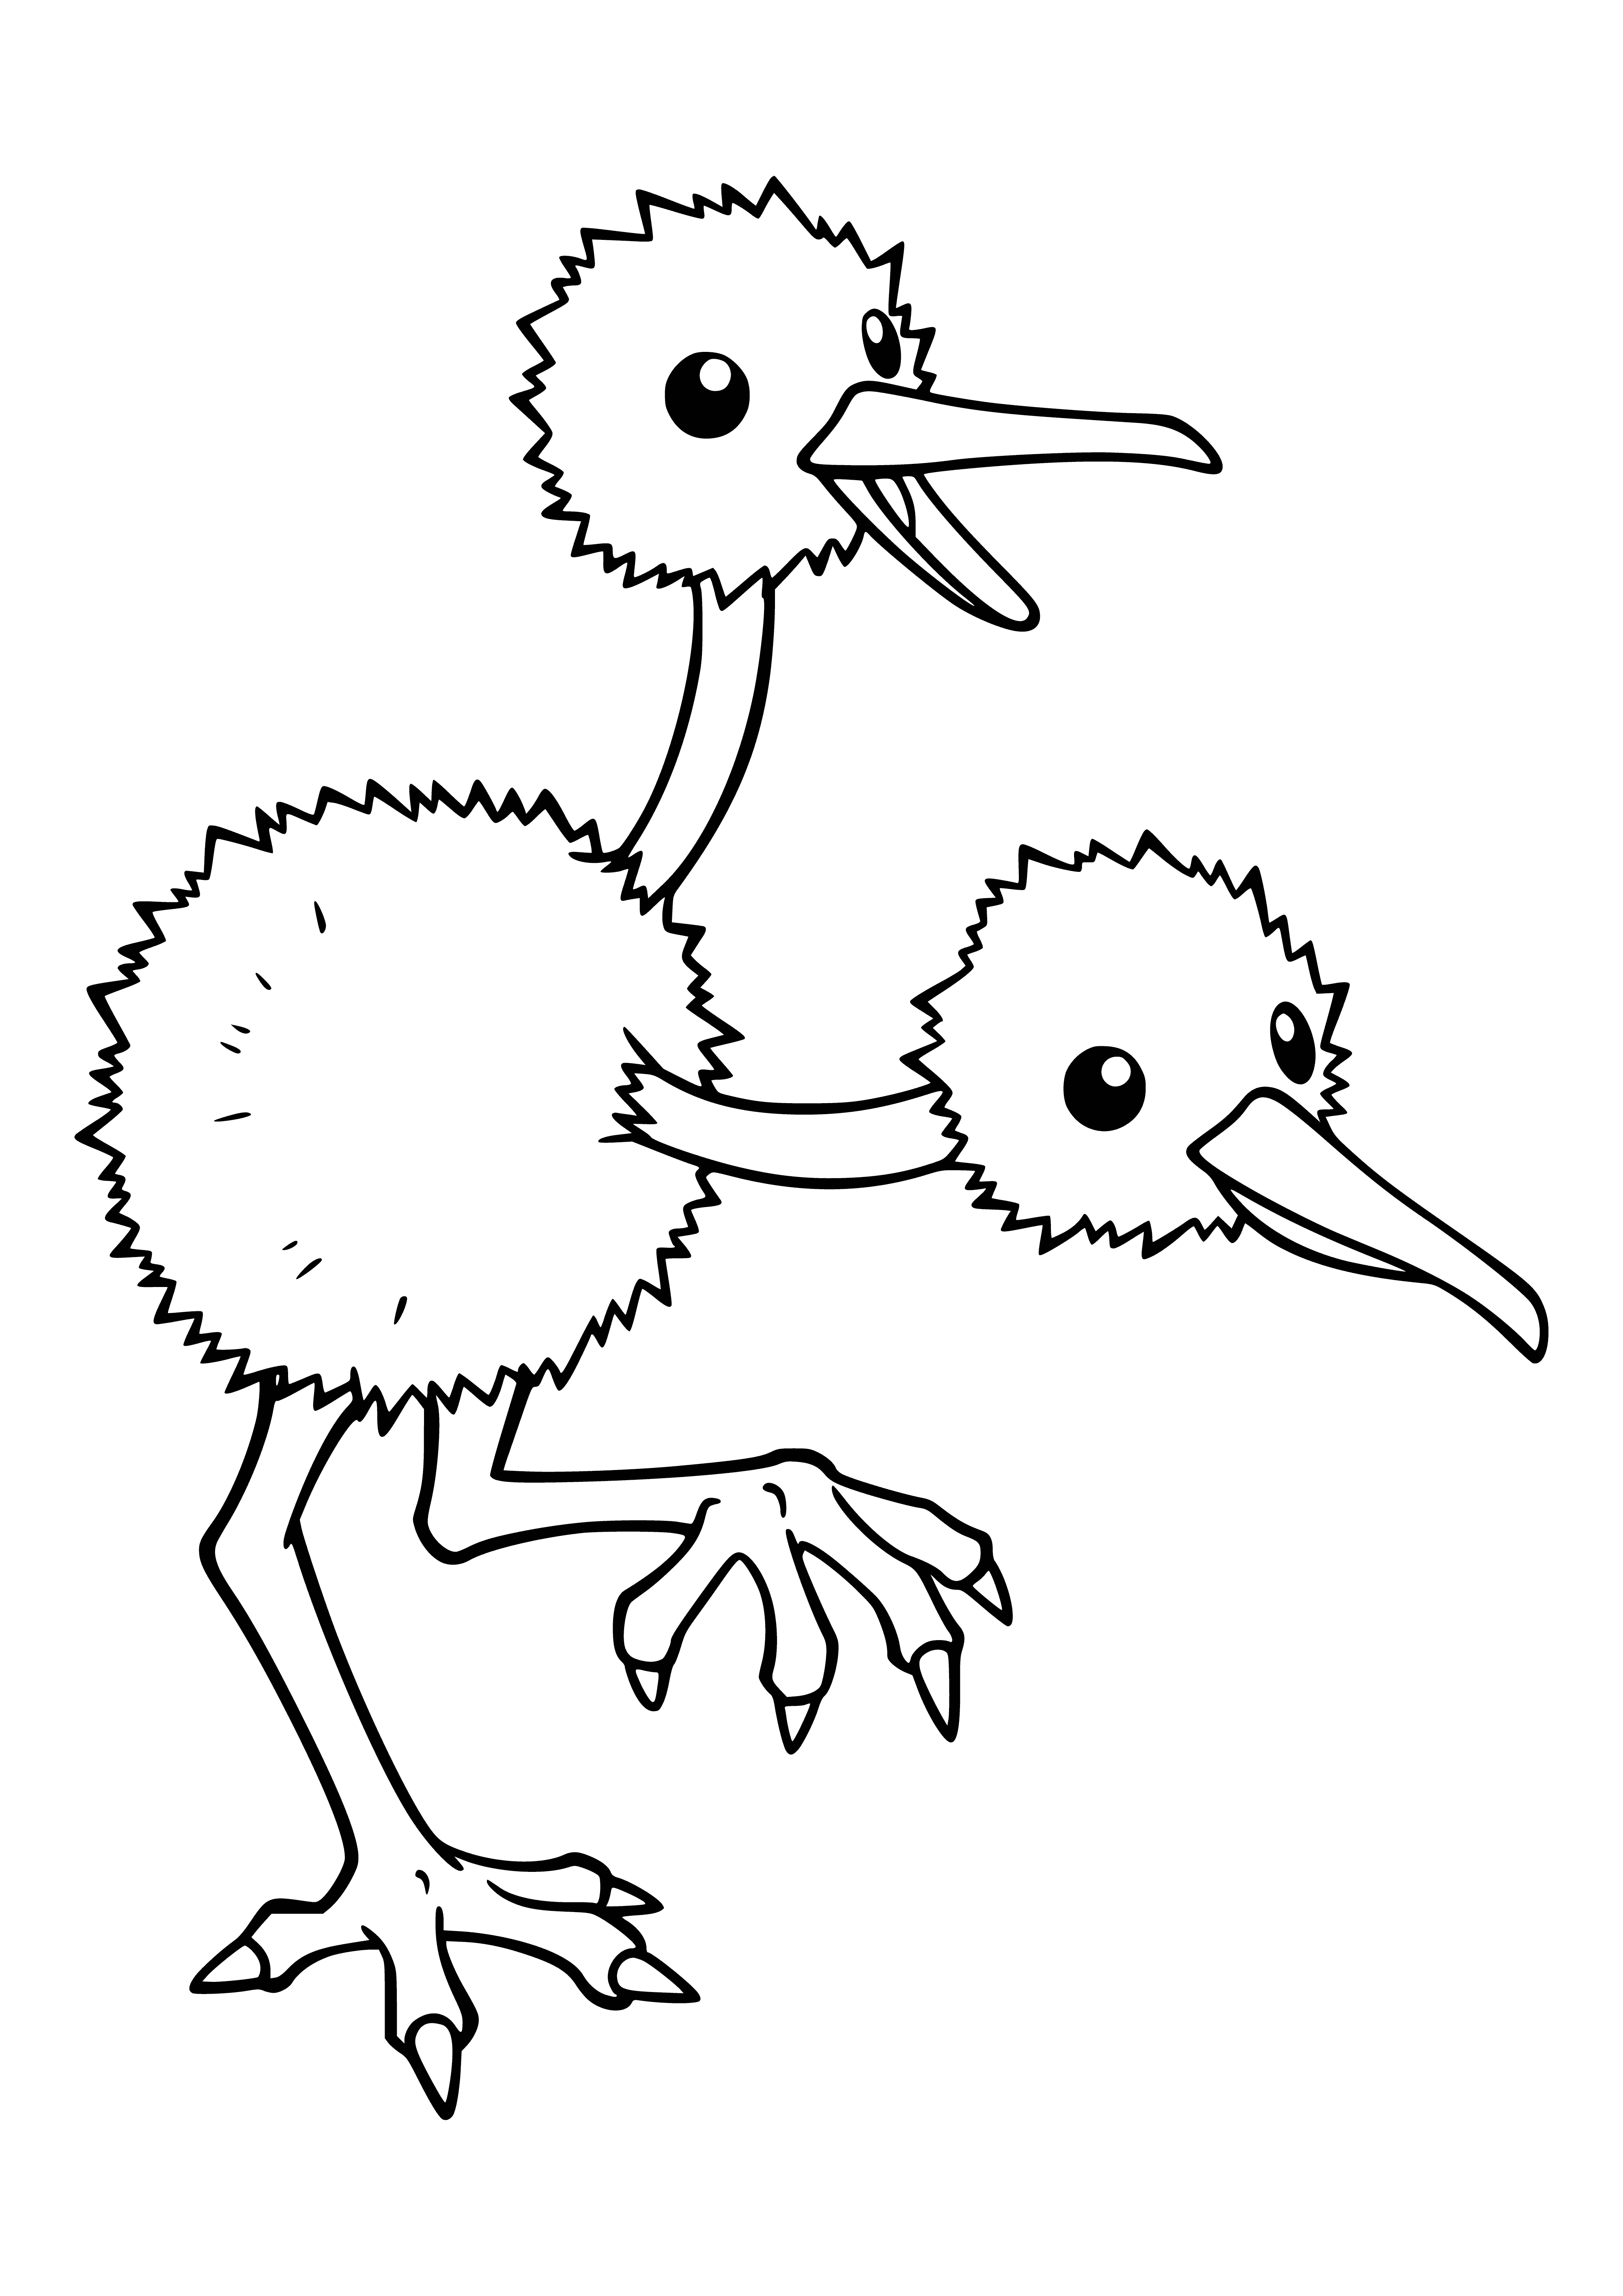 Pokemon Doduo (Doduo) coloring page